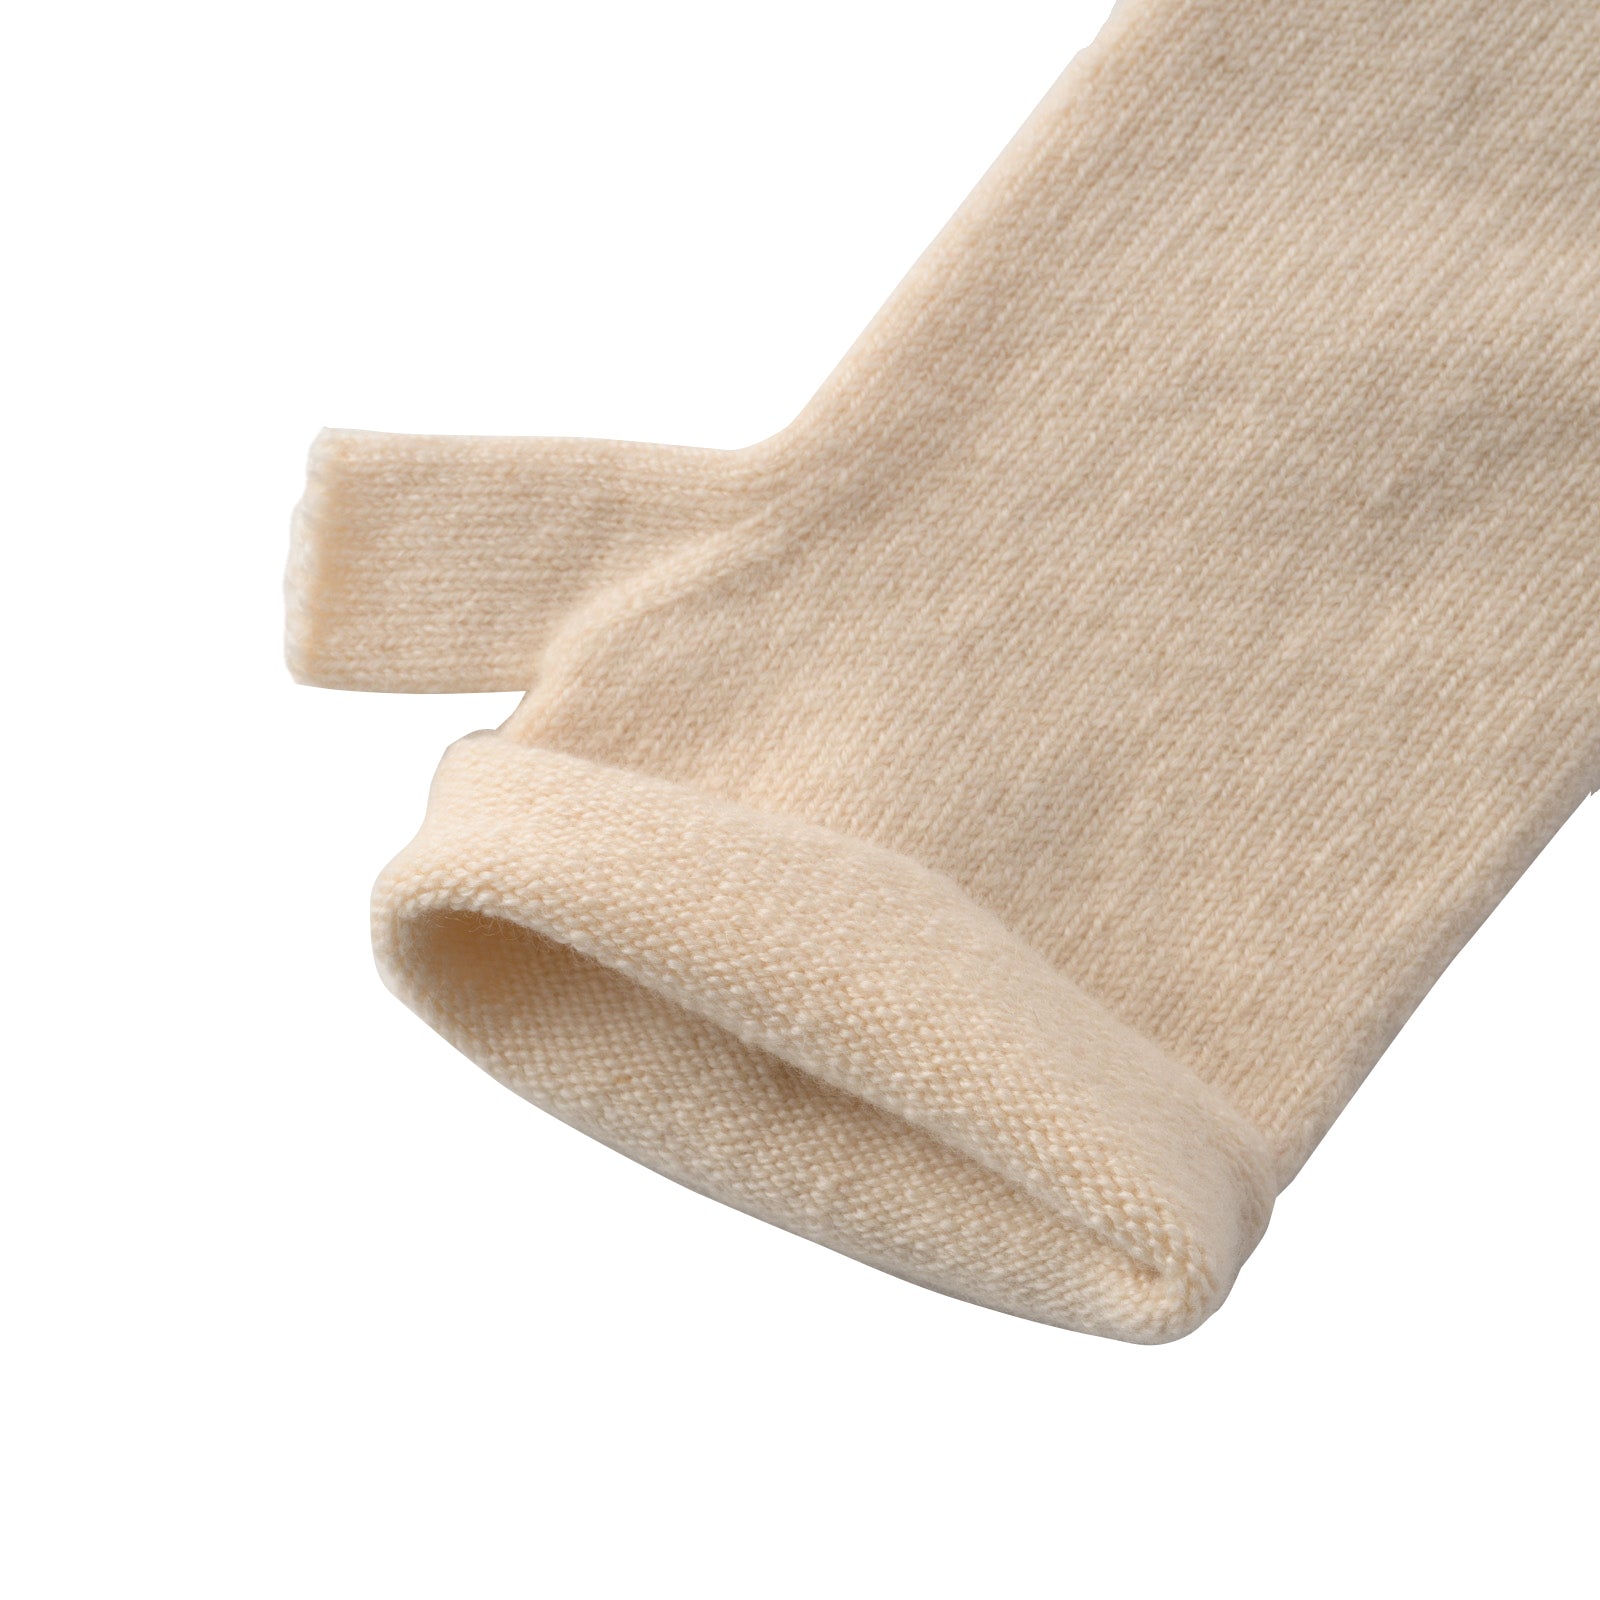 cashmere hand warmers